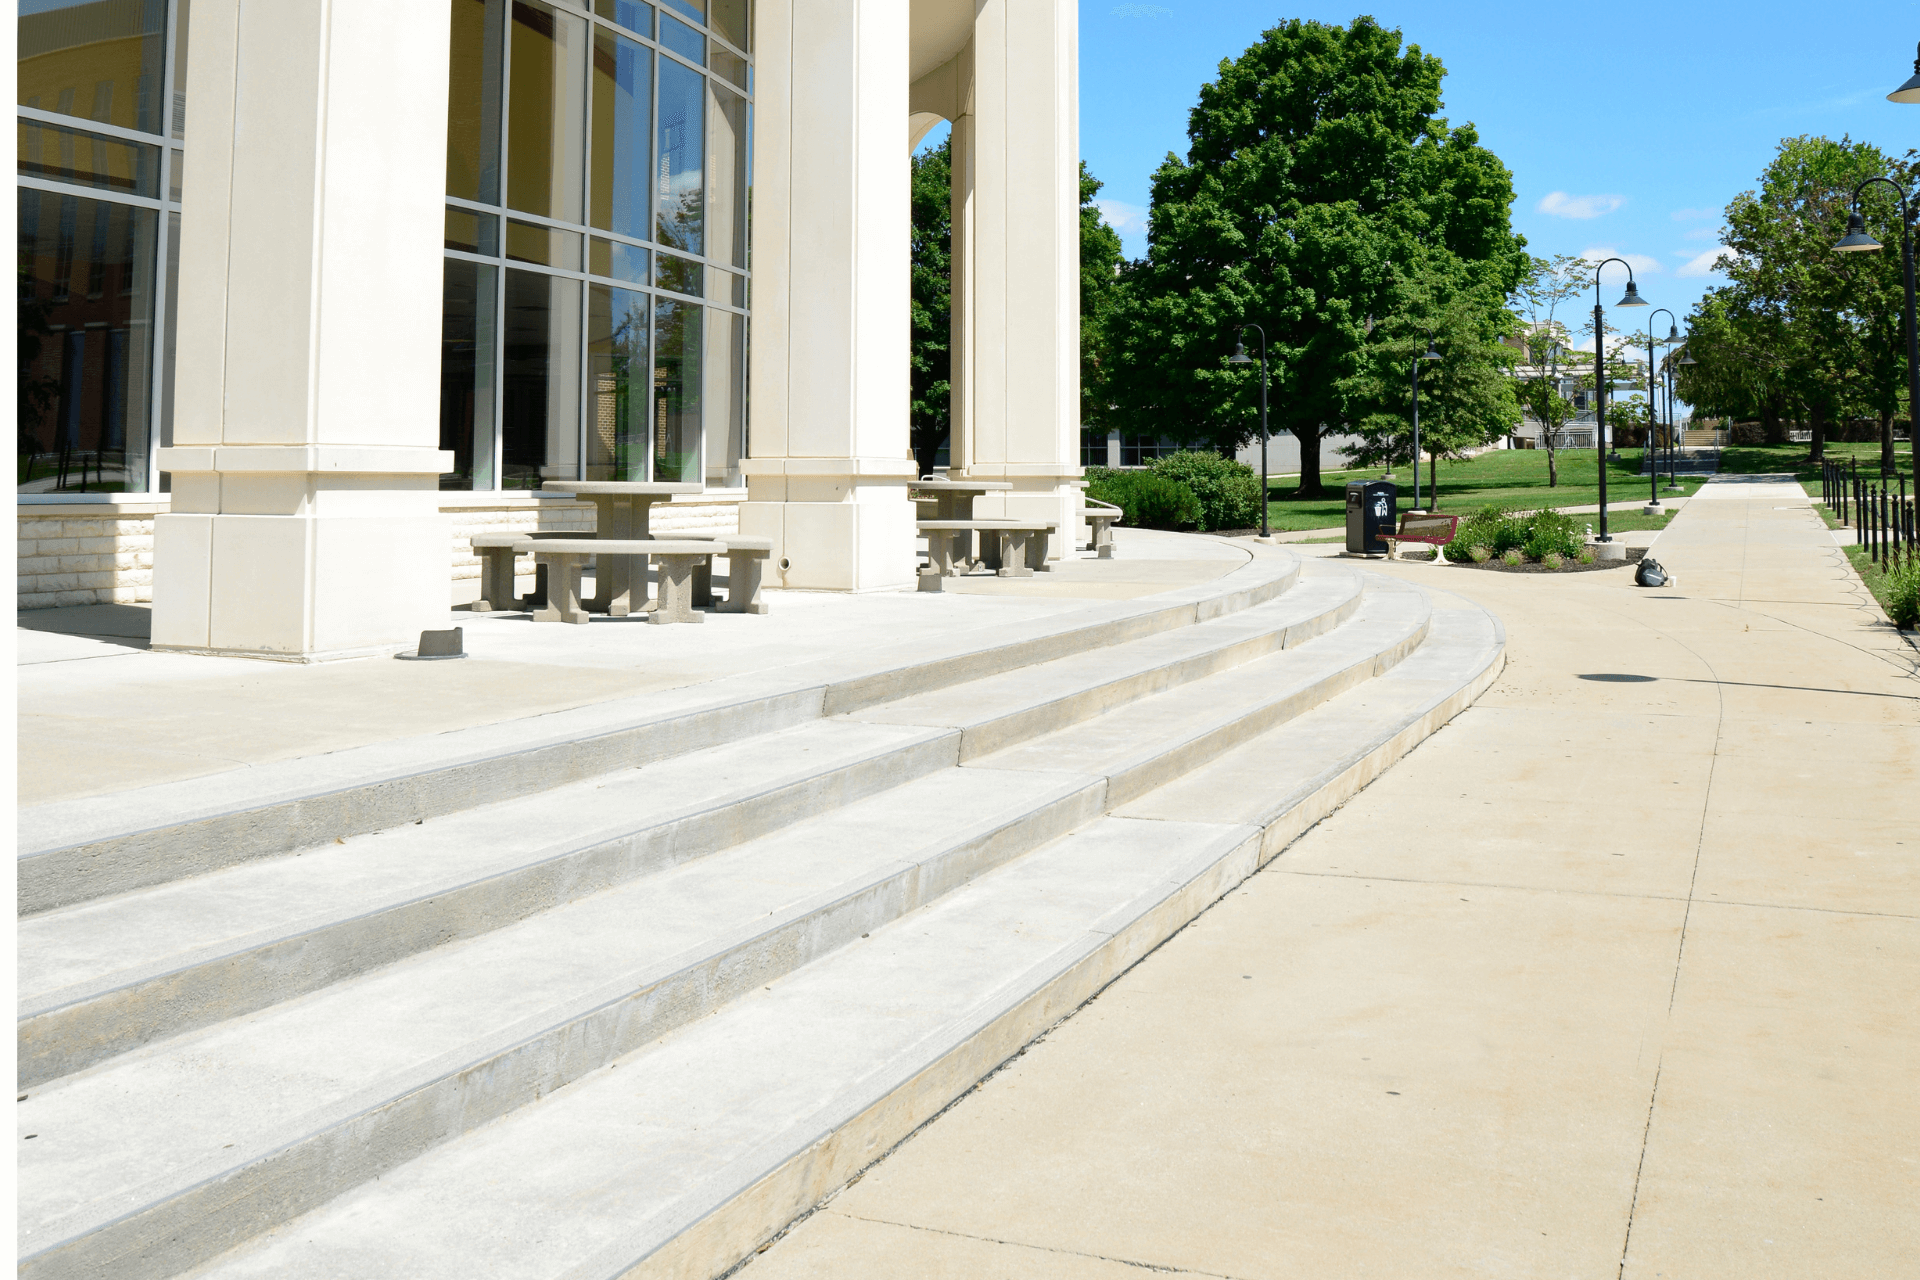 concrete steps in front of building